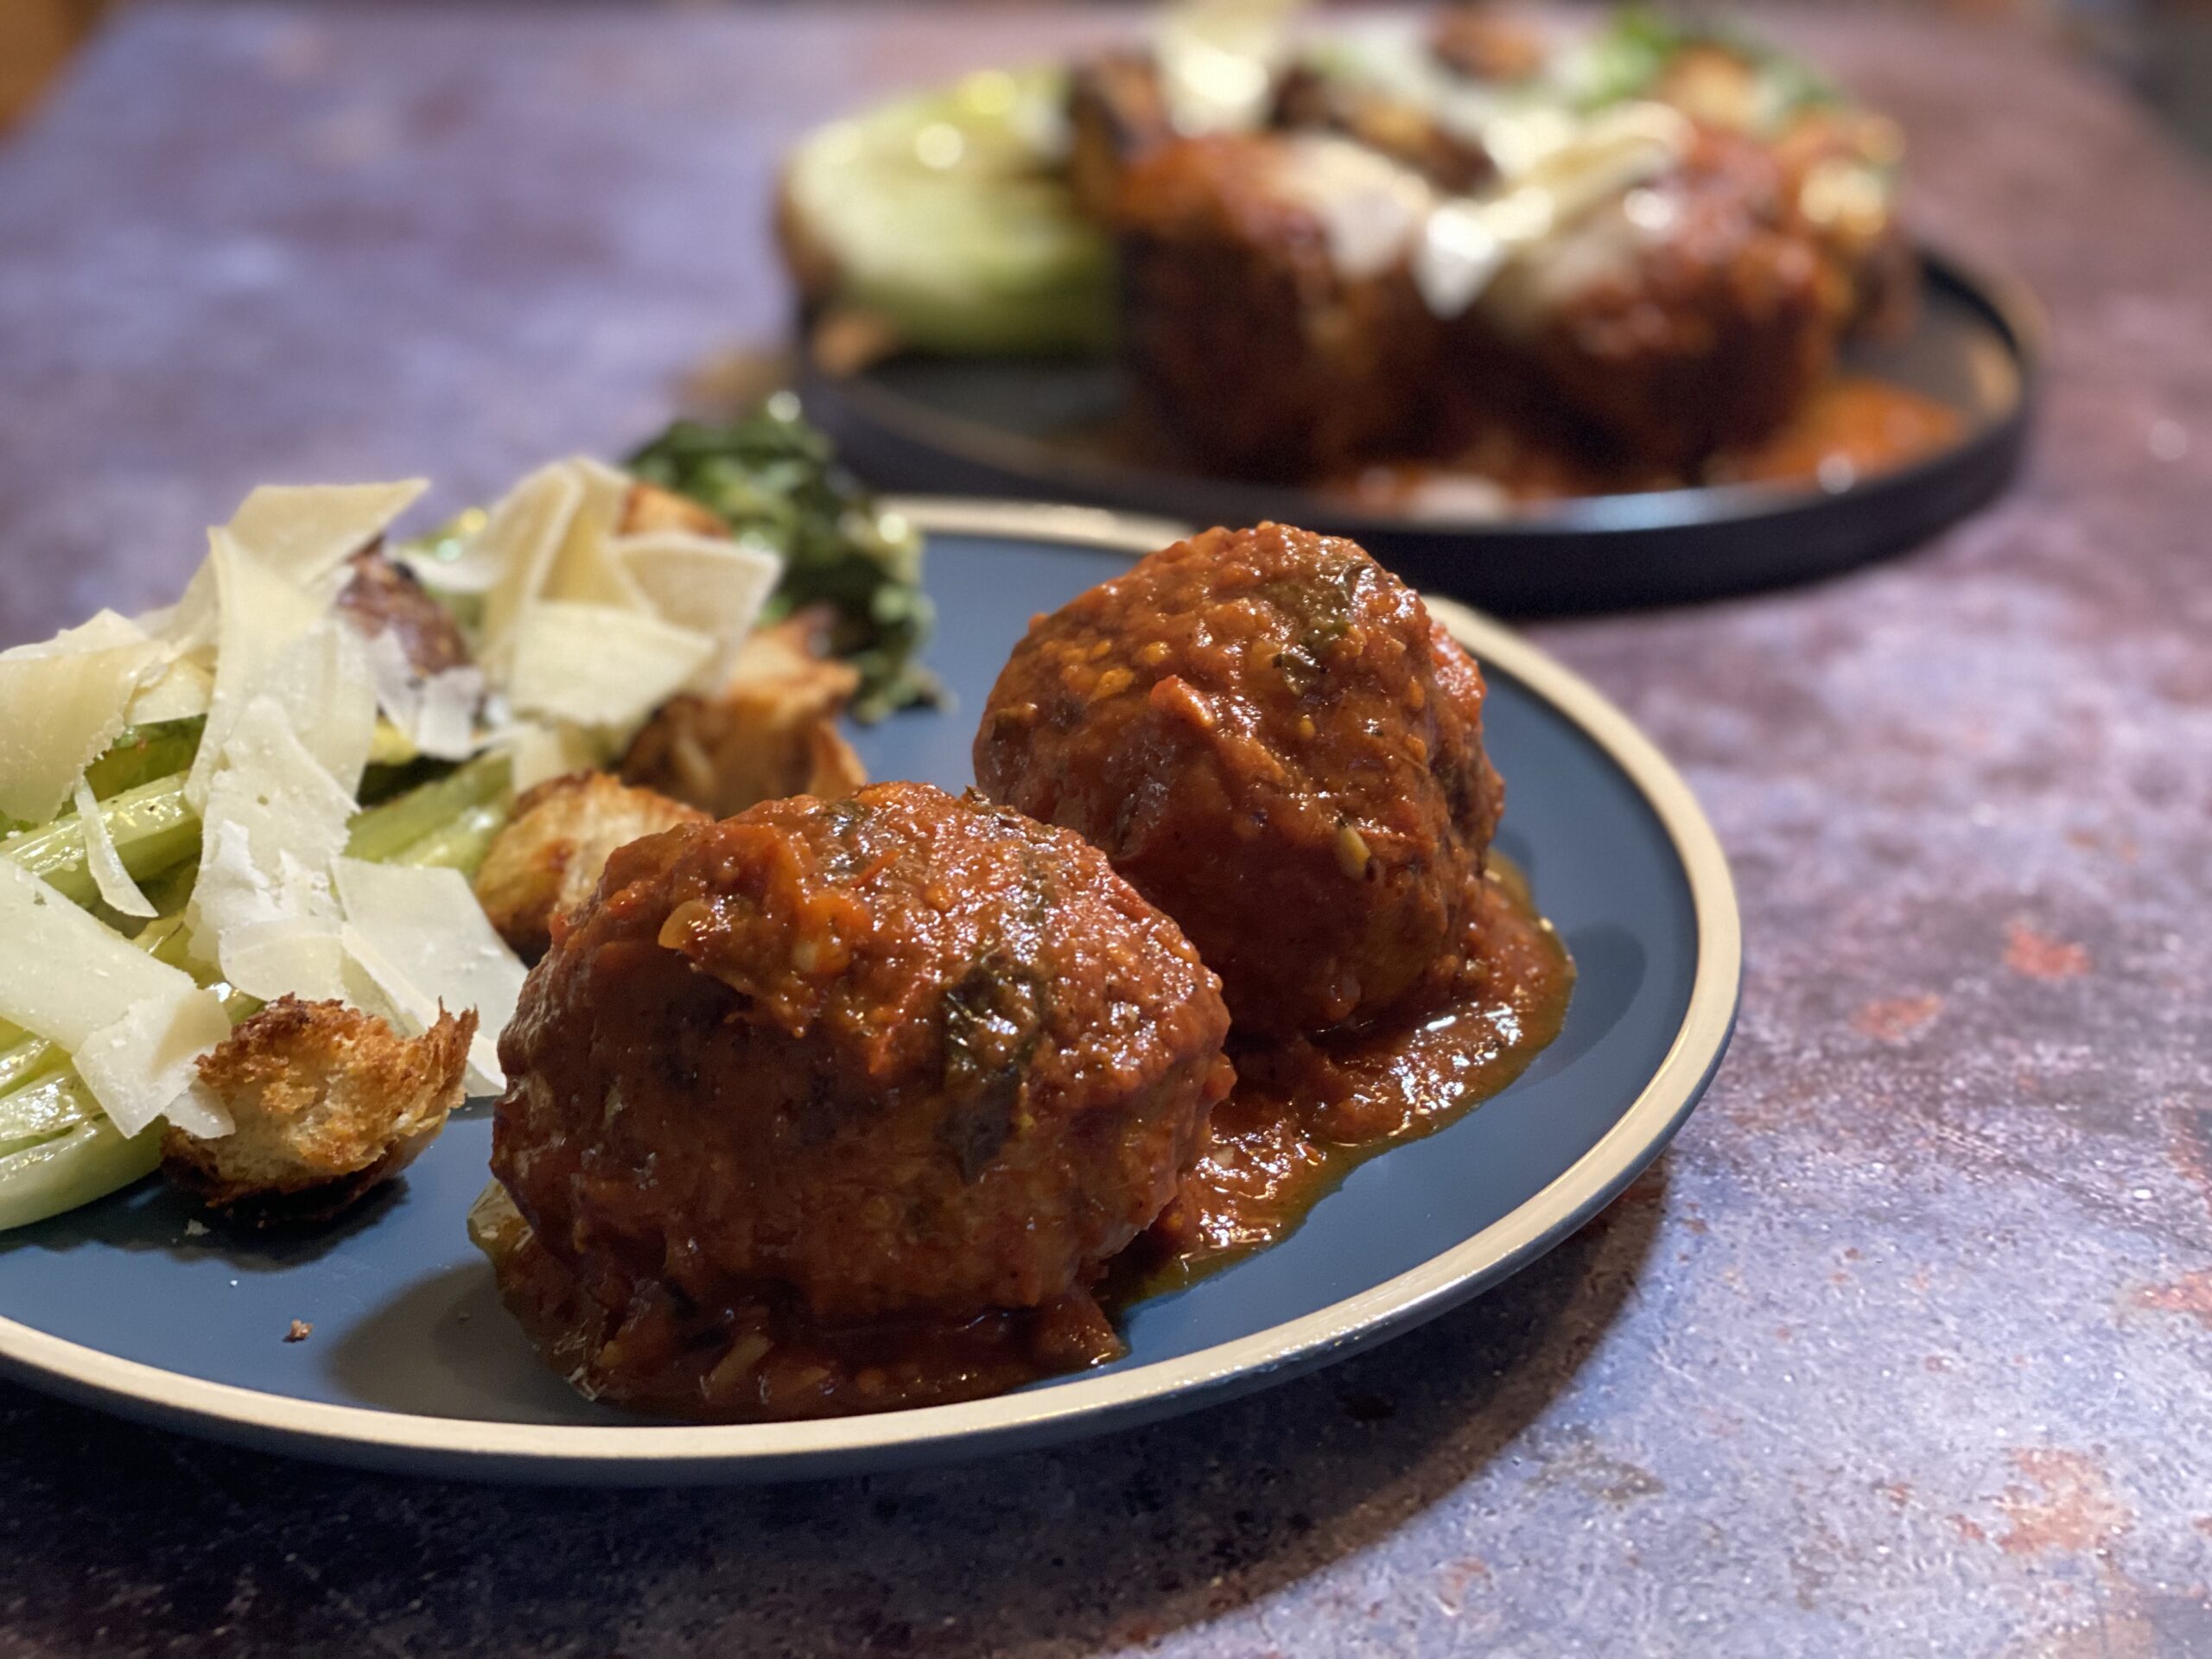 0E8A3EC2 5002 4449 9C1A E93150D75D7D scaled - The Best Sunday Meatballs with Grilled Romaine